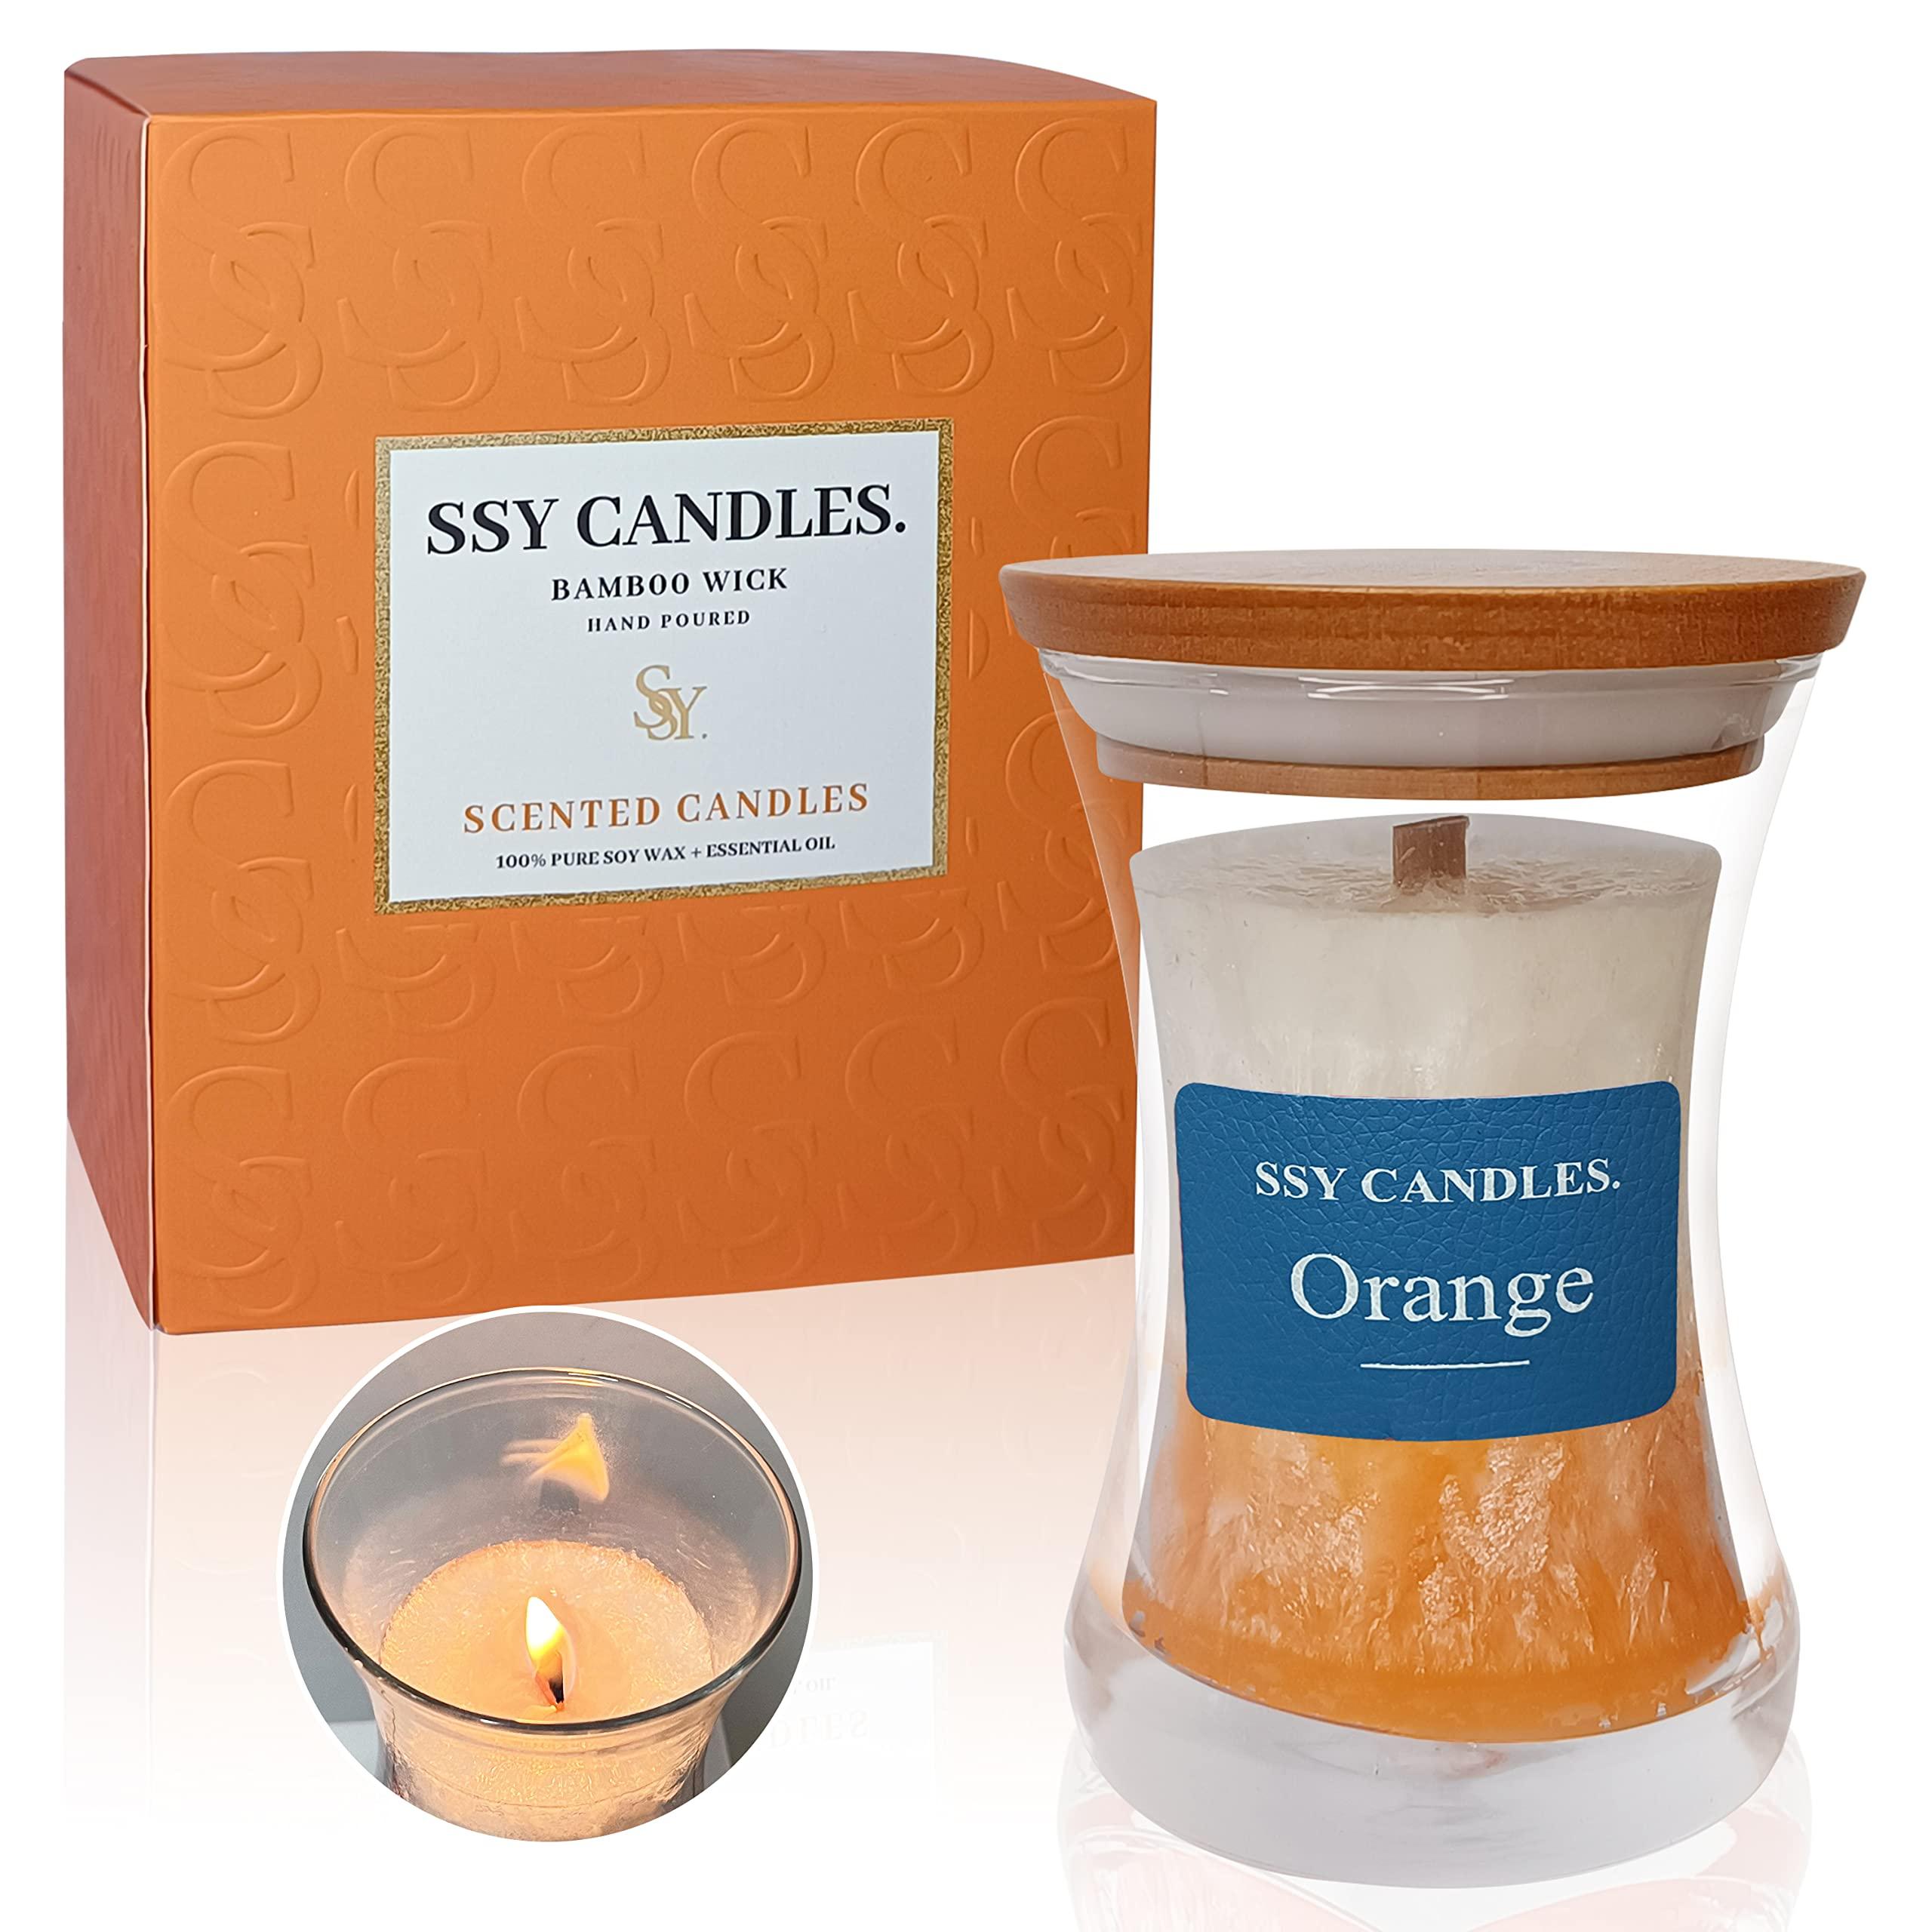 Experience Relaxation with Our Scented Jar Candle - 100% Natural Soy Wax, Burns up to 45 Hours, Aromatherapy Candle Gift for Any Occasion (#14 Single Lavender) 0